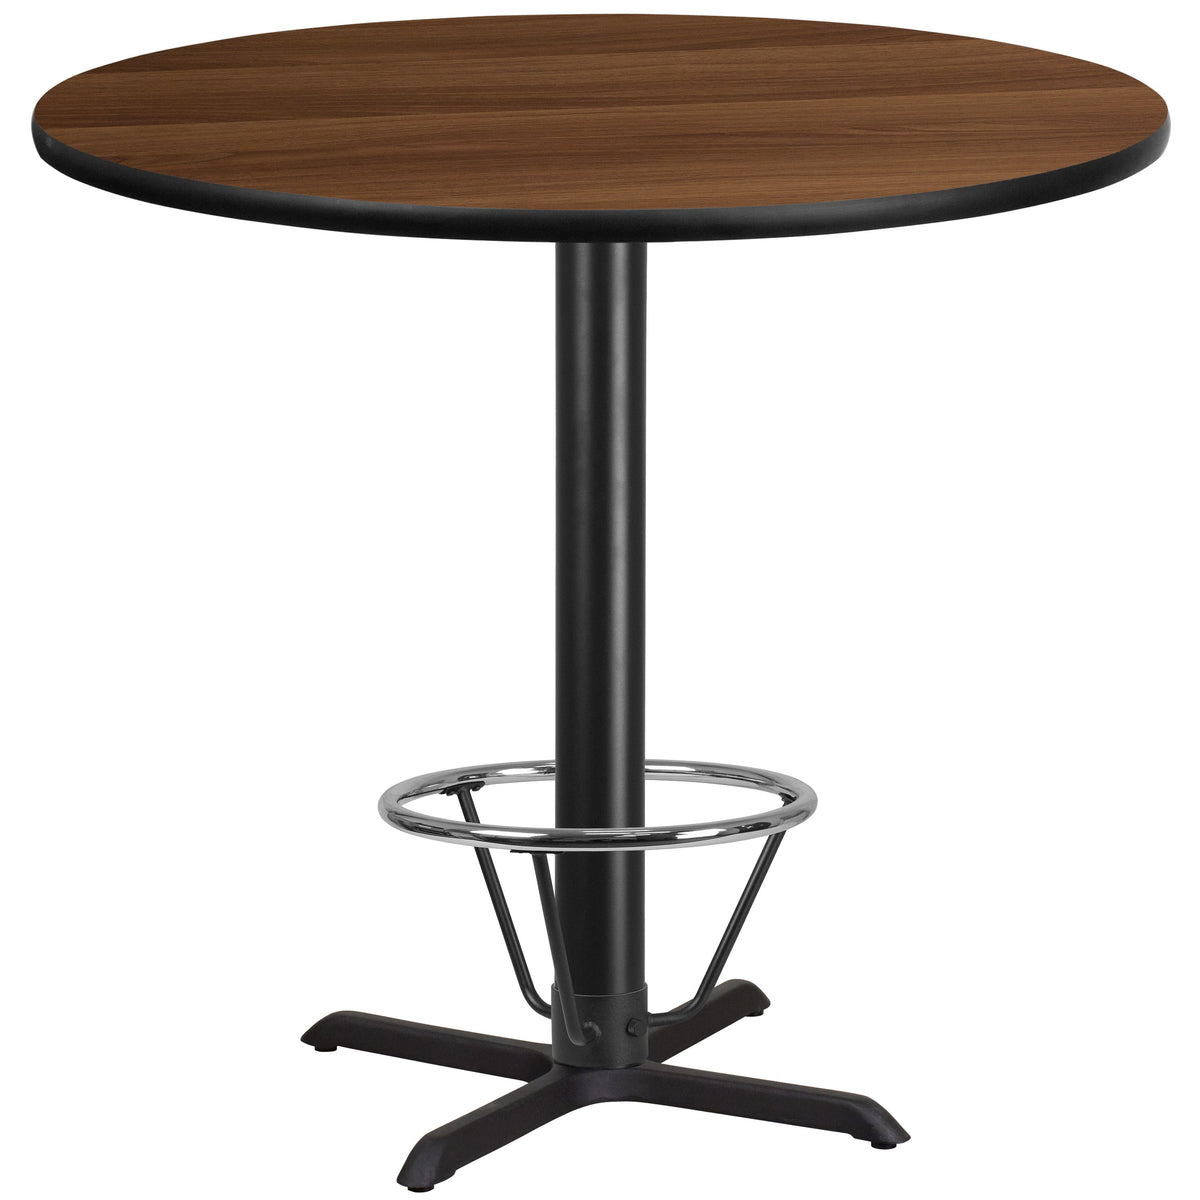 Walnut |#| 42inch Round Walnut Laminate Table Top & 33inchx 33inch Bar Height Base with Foot Ring